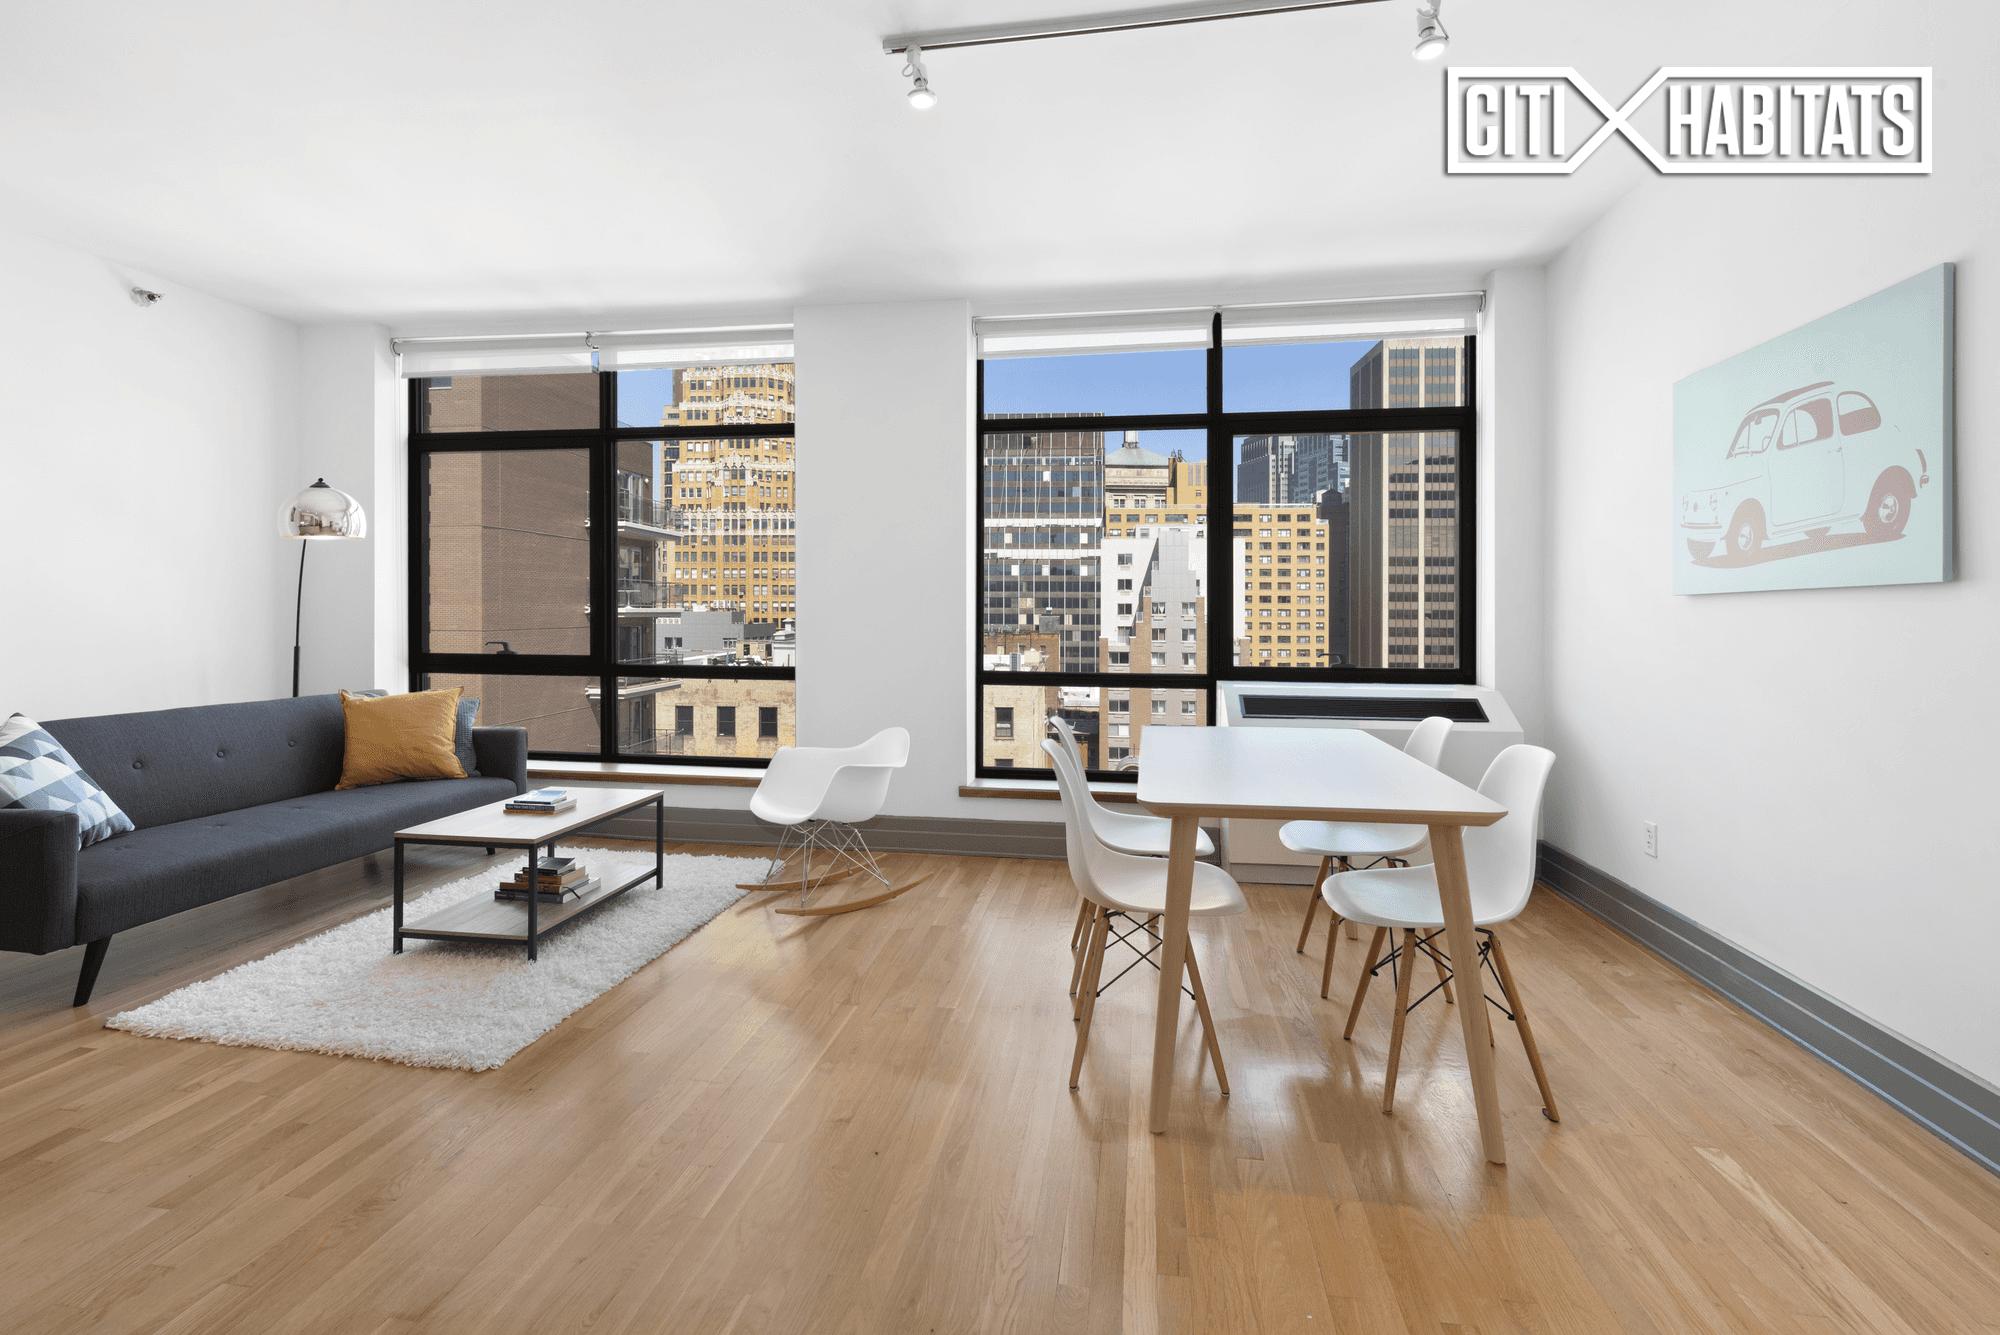 AVAILABLE JUNE 6THFURNISHED RENTAL JUNE AUGUST 31ALSO AVAILABLE LONG TERMApartment 9 NF is truly spacious with floor to ceiling views of the iconic Brooklyn Heights neighborhood.